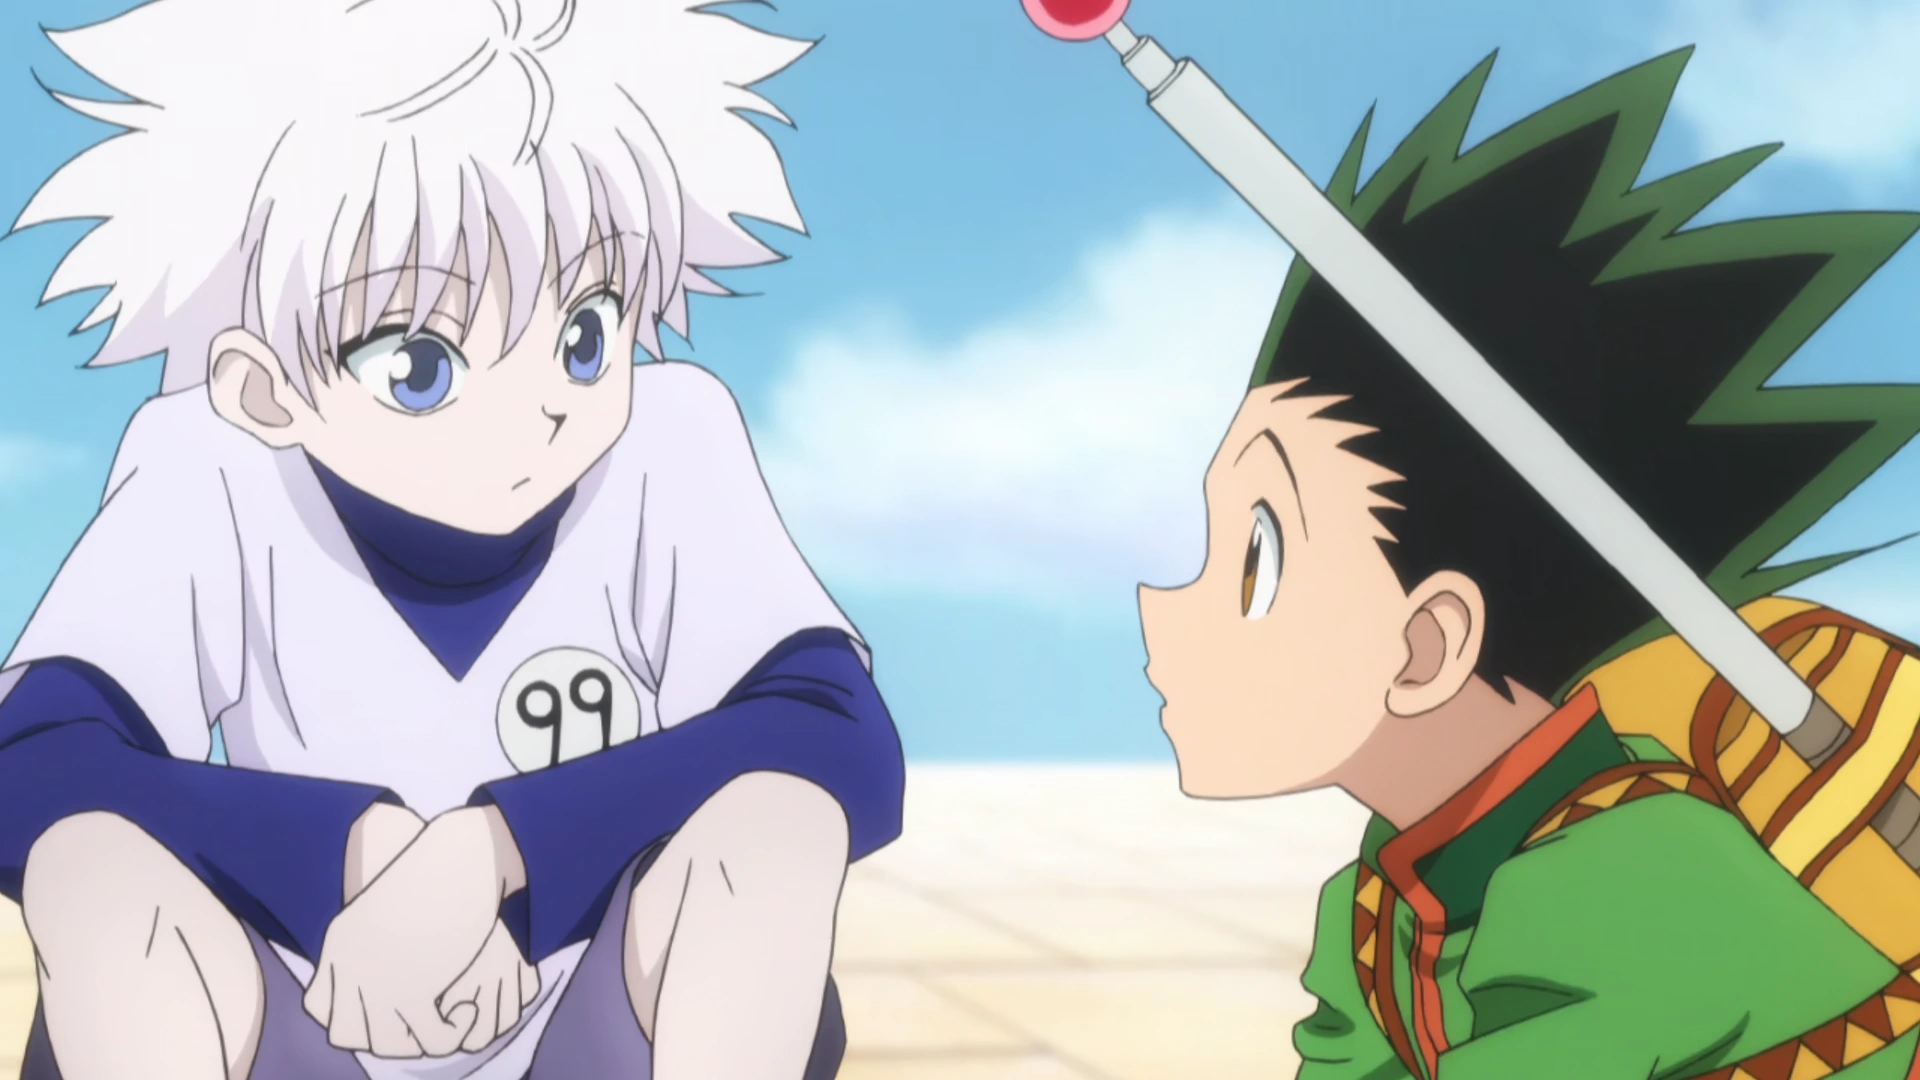 Hunter x Hunter 1999 vs 2011: Which One is Better?